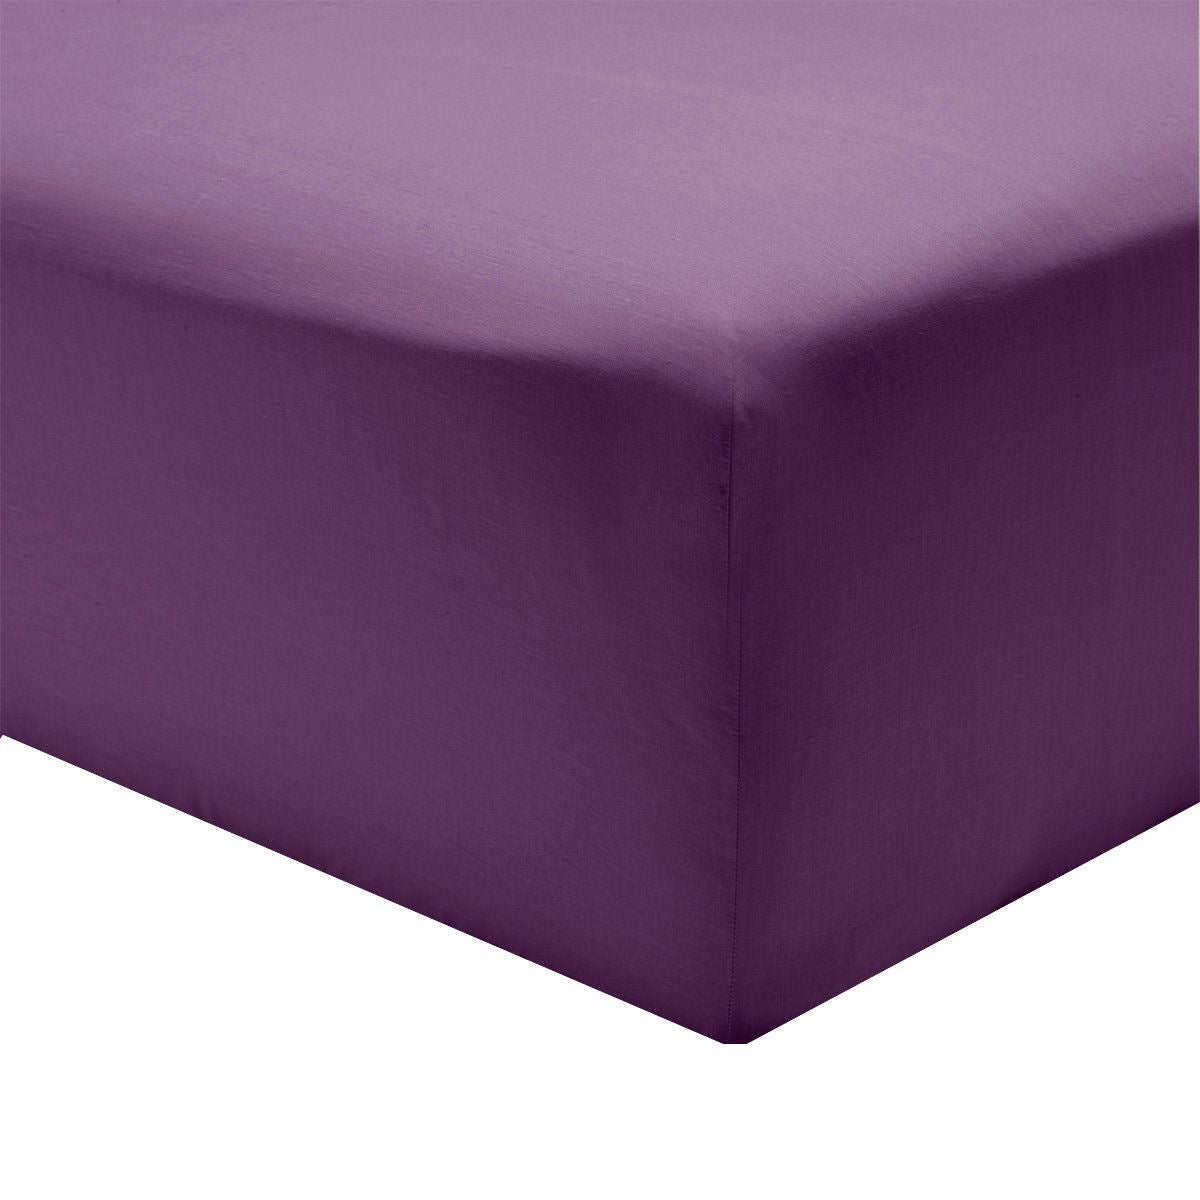 Egyptian Cotton Fitted Bed Sheet 16" Deep Or Pillowcase - TheComfortshop.co.ukBed Sheets0721718960881thecomfortshopTheComfortshop.co.ukLilac 16In T200 Fitted Single NZLilacFitted Sheet Single OnlyEgyptian Cotton Fitted Bed Sheet 16" Deep Or Pillowcase - TheComfortshop.co.uk